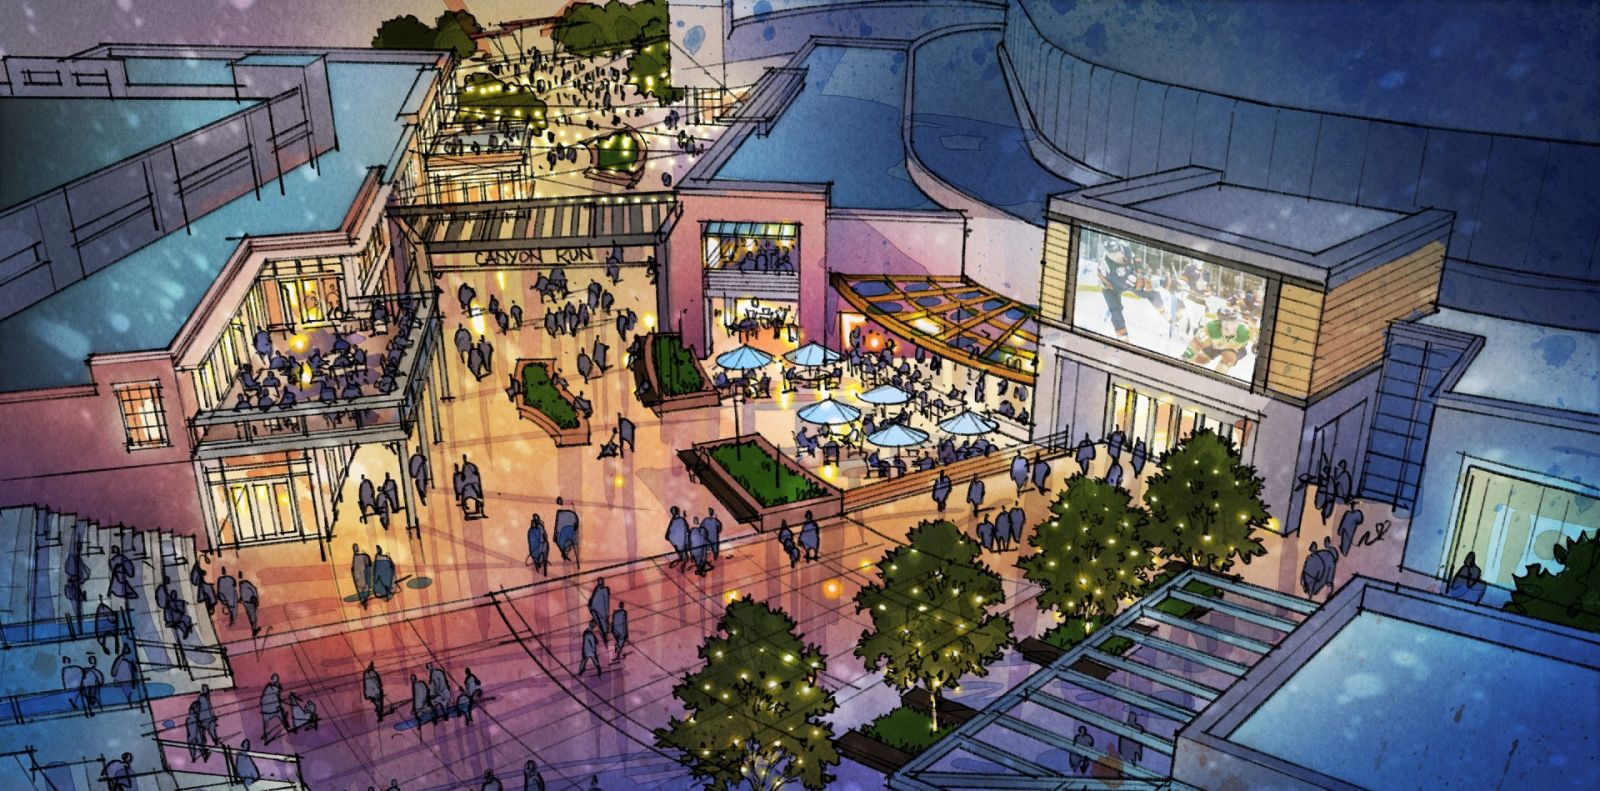 Concepts discussed included green spaces, pedestrian-friendly areas, retail and entertainment opportunities and mixed-use development. (Rendering/Provided)